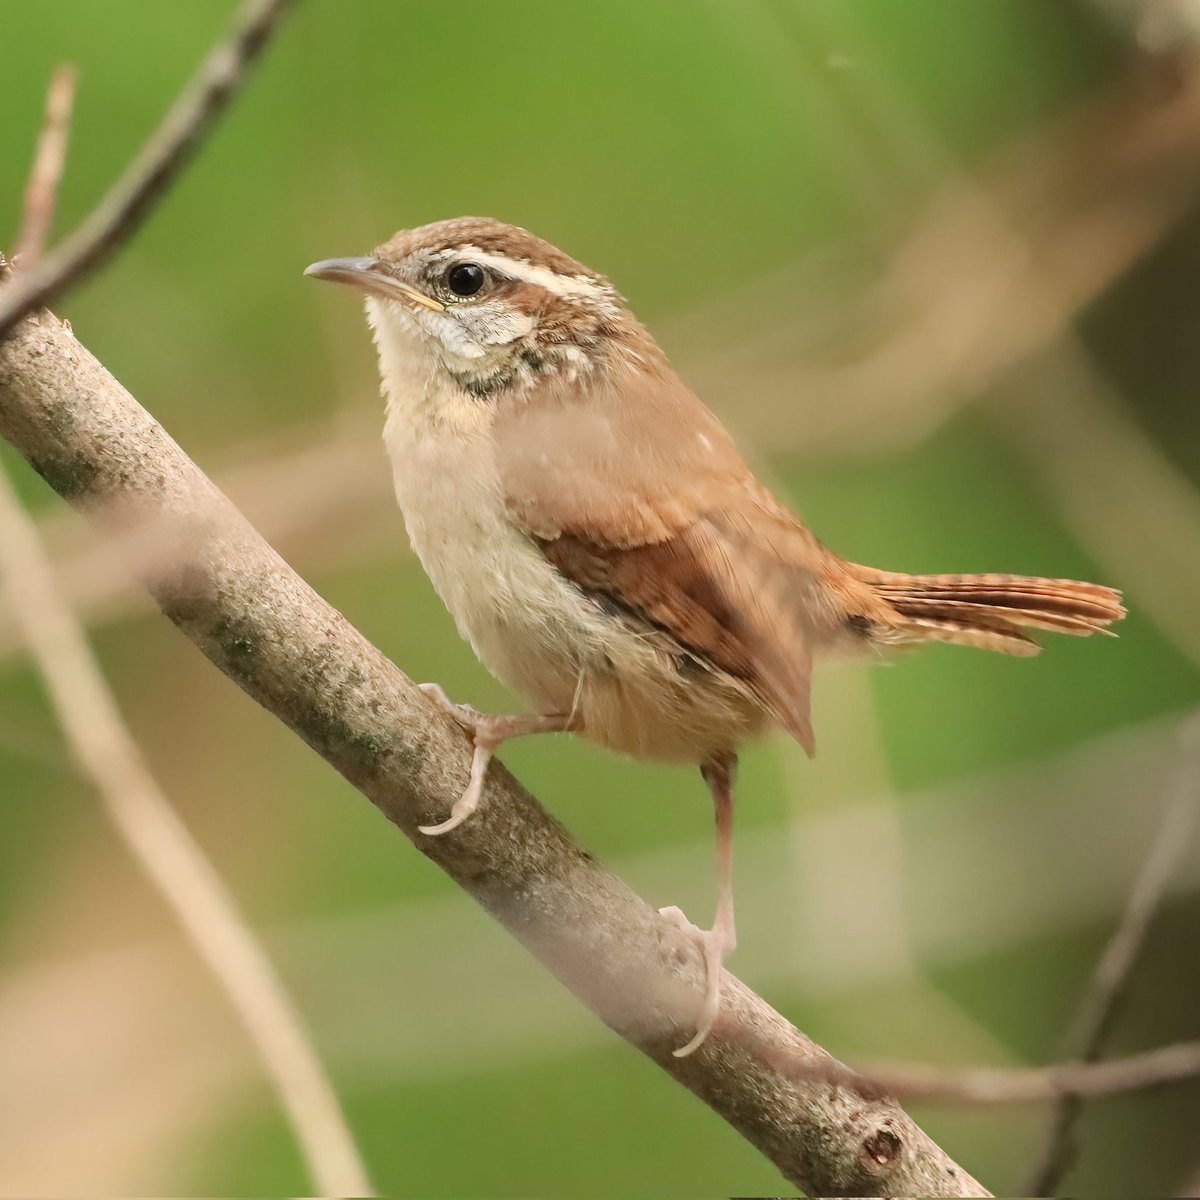 What a perfect pose from this Carolina wren!
#carolinawren #carolinawrens #wrens #wren #backyardvisitor #backyardvisitors #birdlife #backyardbirding #birdlovers #backyardbirding #ohiobirdworld #ohiobirdlovers #birdwatching #birdwatchers #birdwatchersdaily #birdwatcher